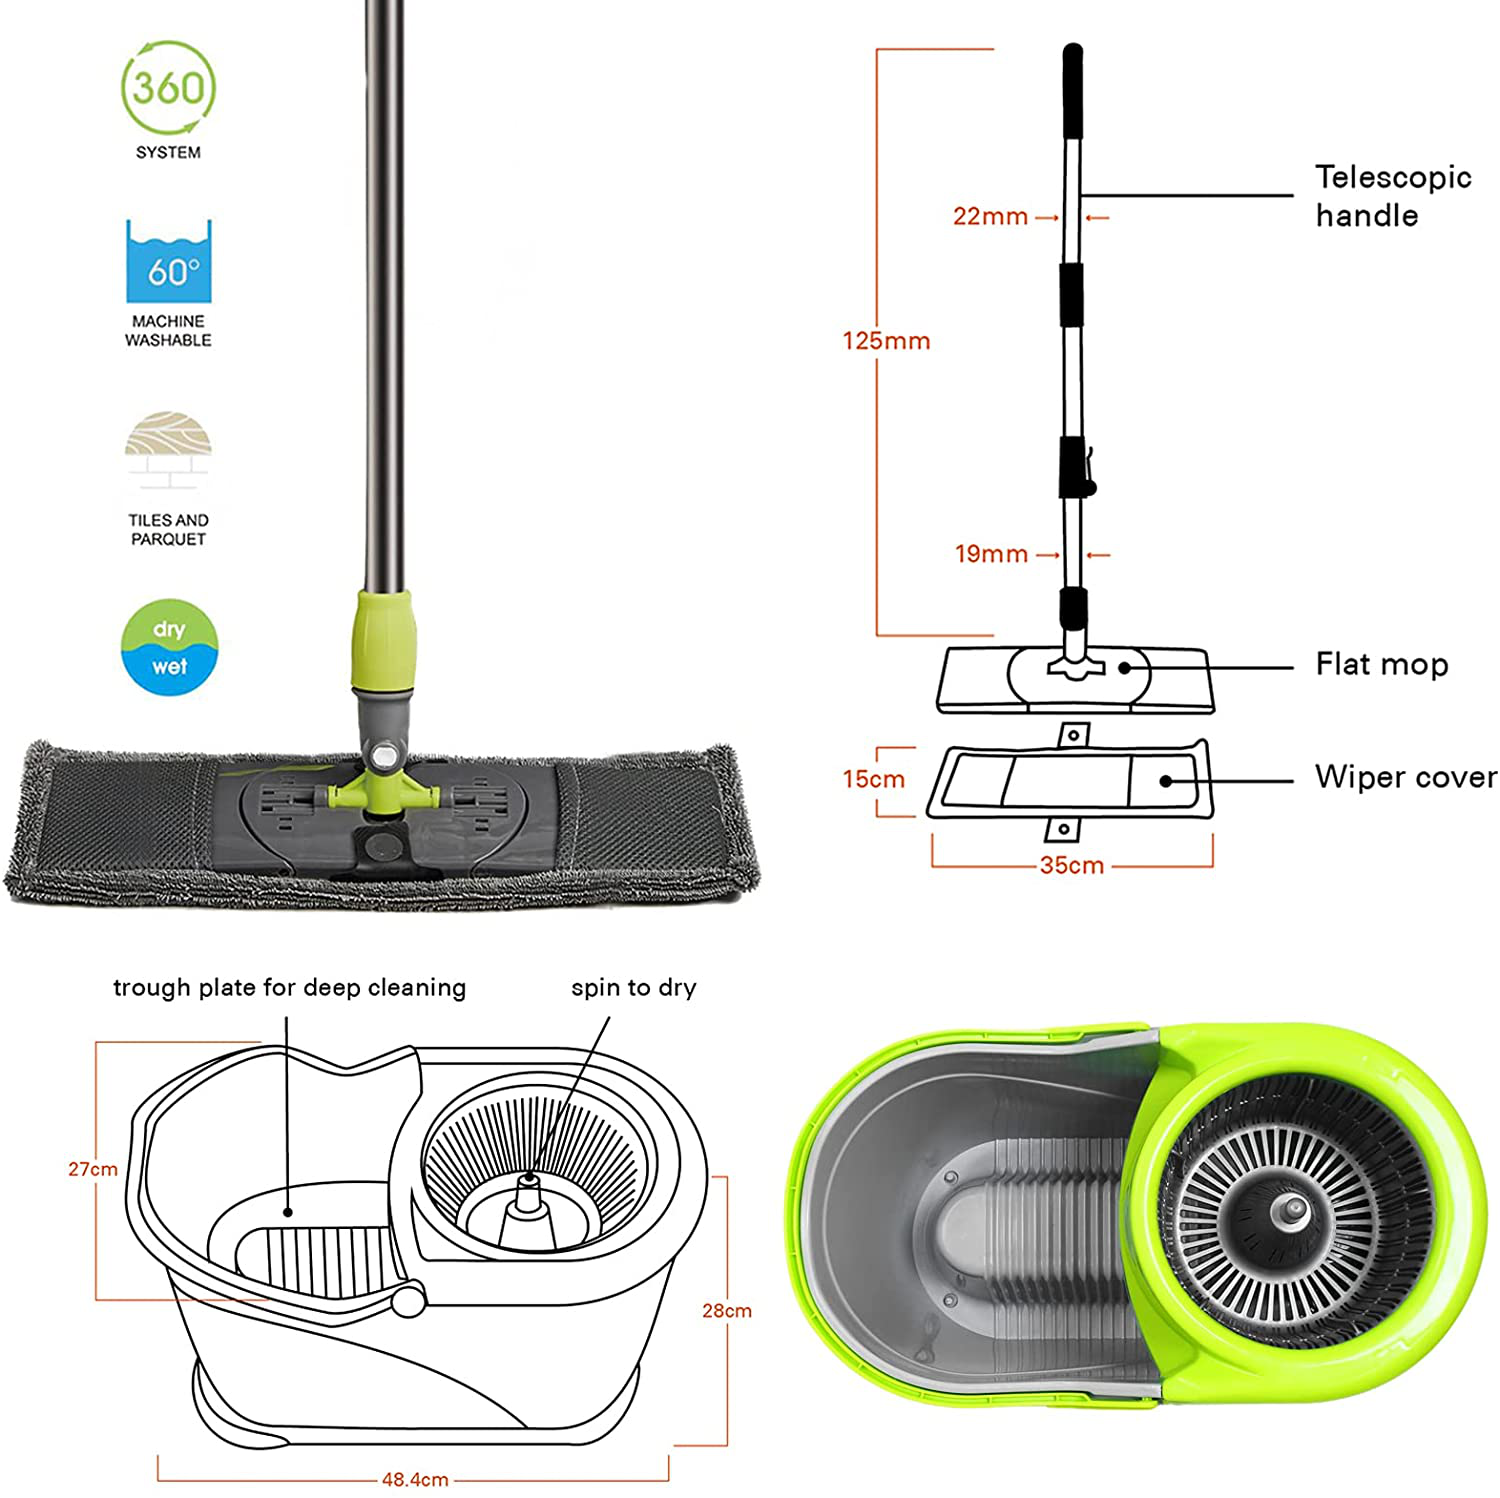 Microfiber 360° Spin Flat Mop Bucket Adjustable Handle Floor Cleaning System with Press Cleaning and Spin-Dry Two Devices